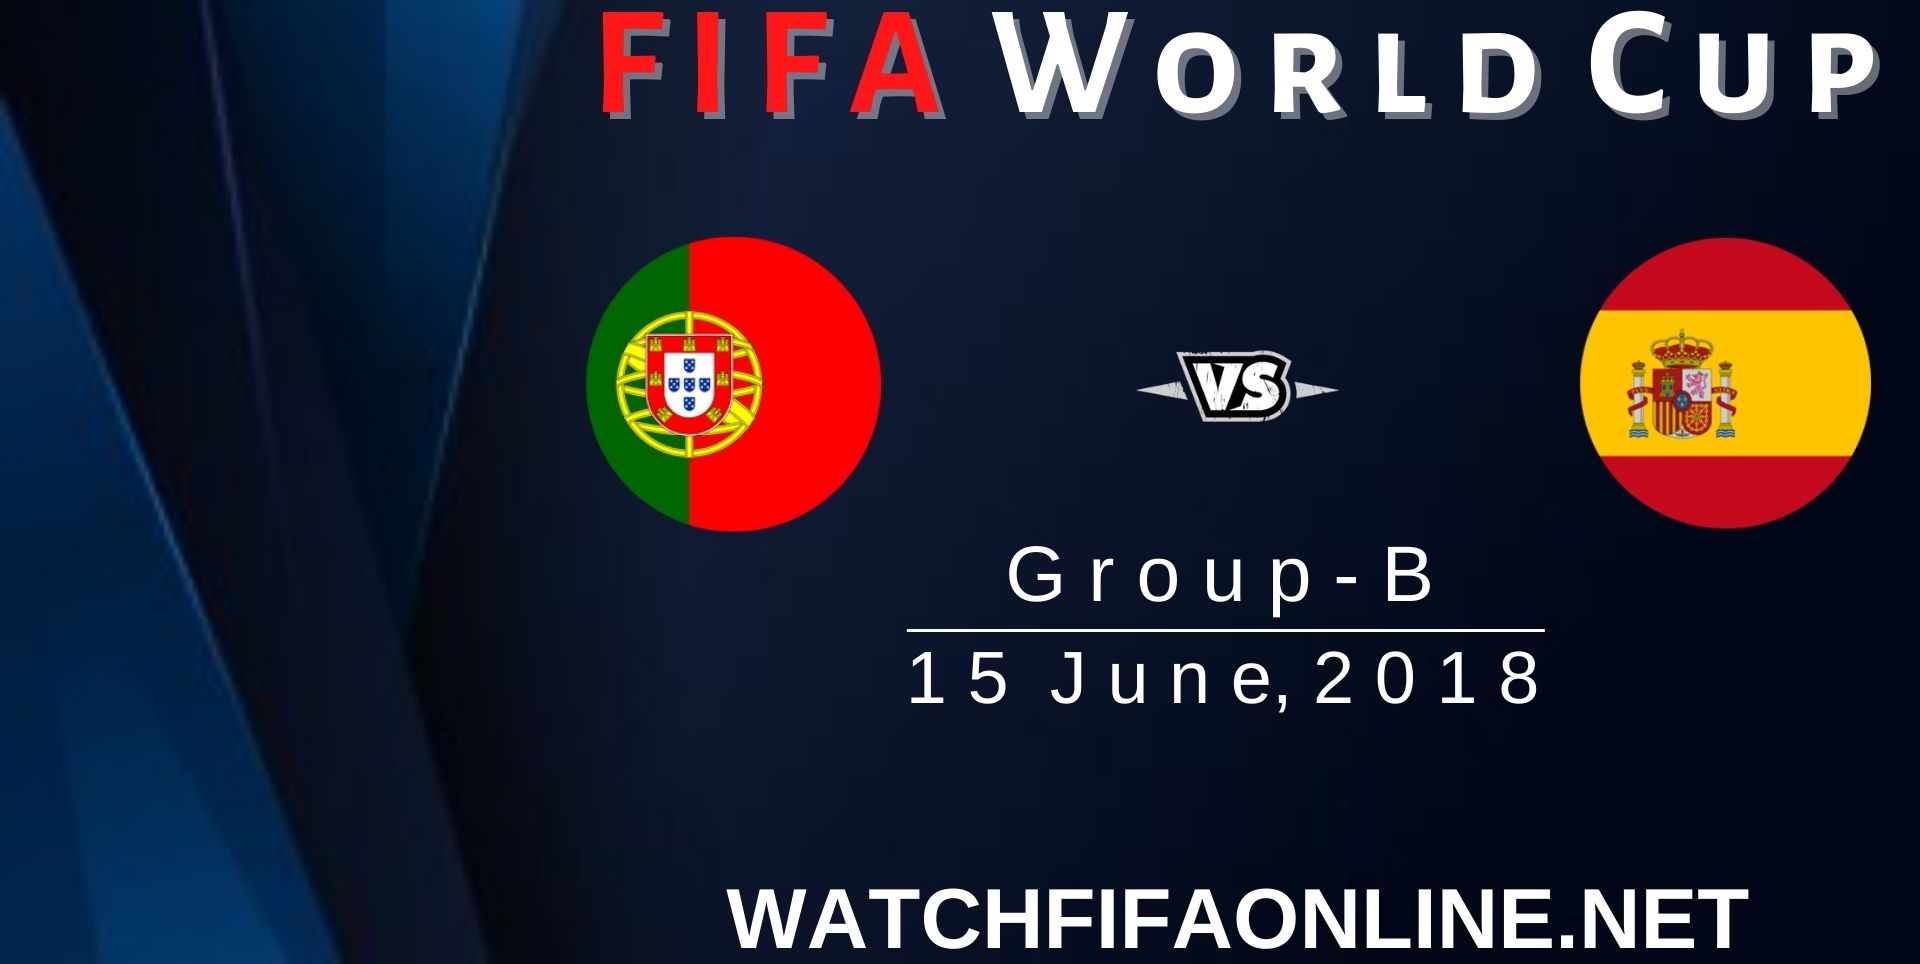 Portugal Vs Spain FIFA World Cup Highlights 2018